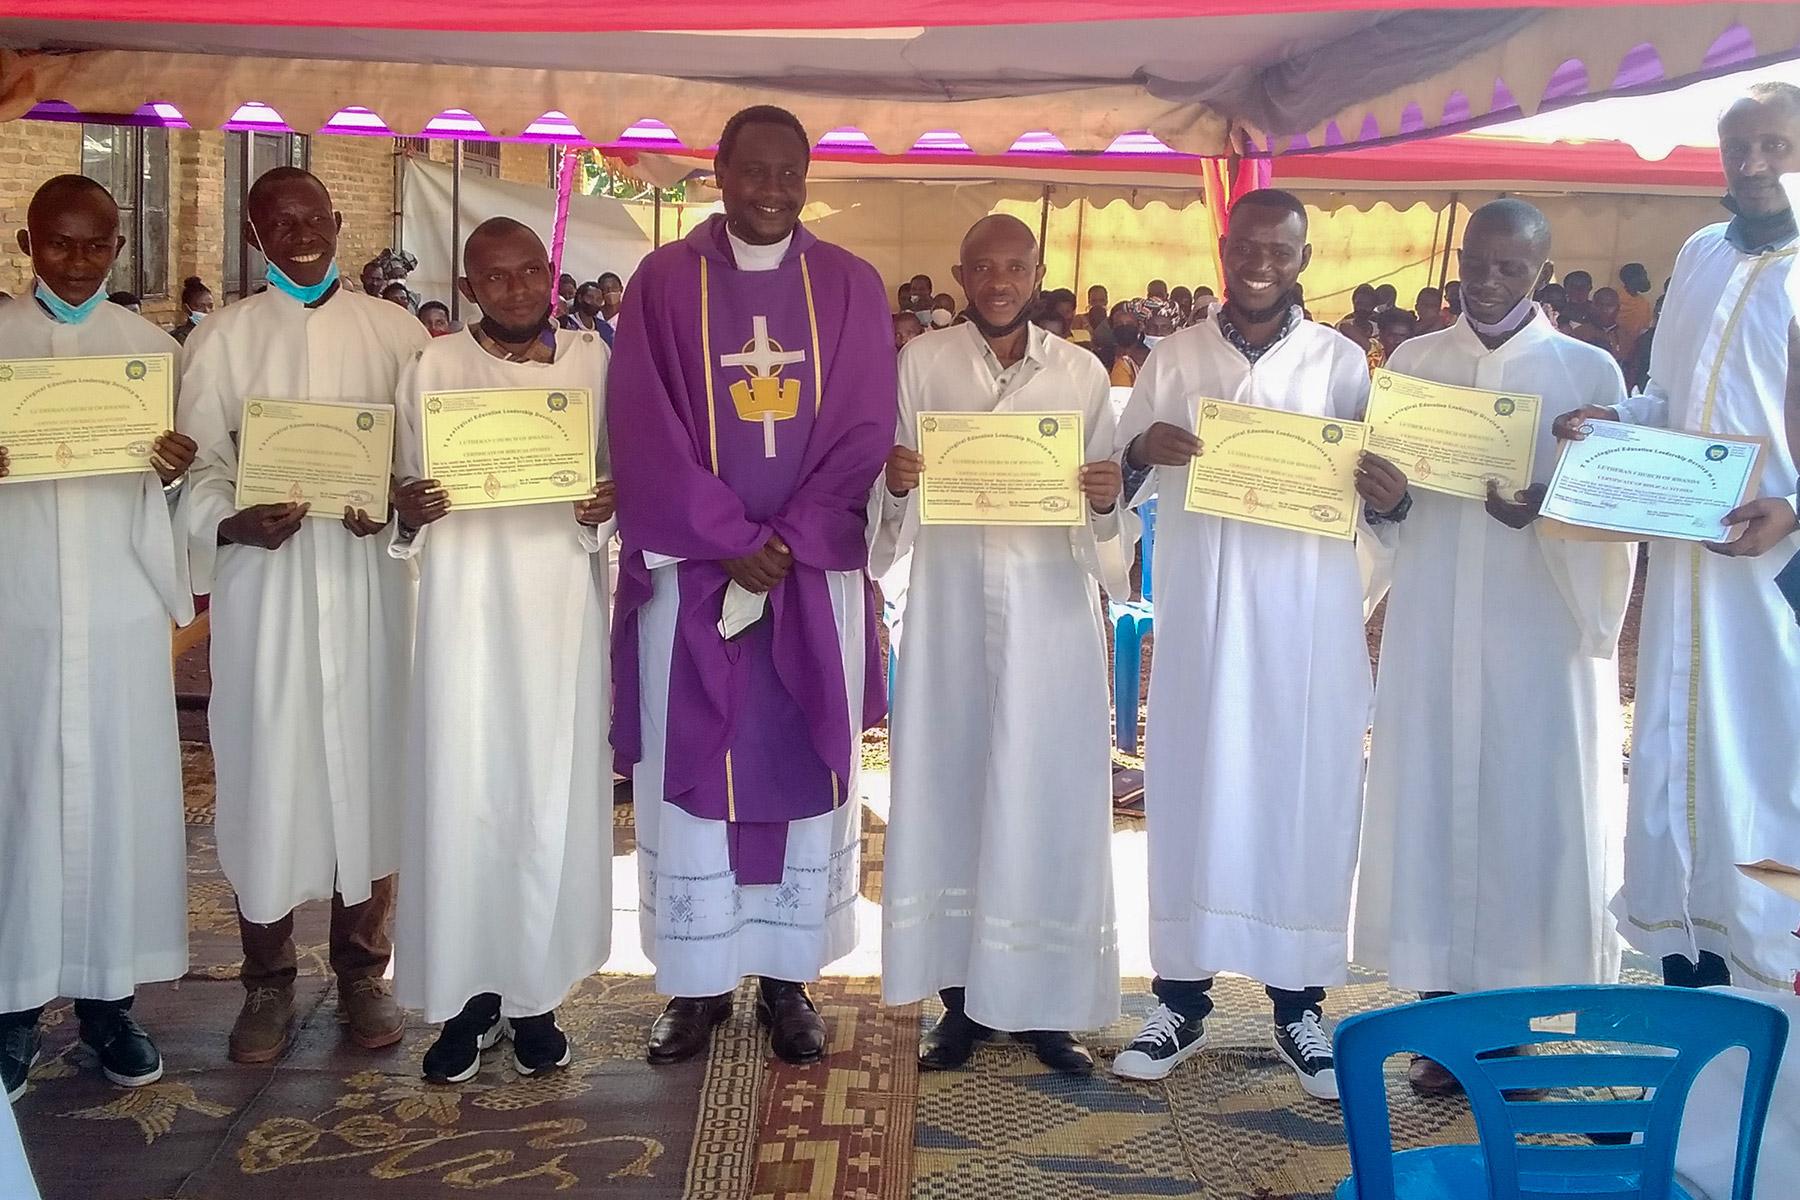 Evangelists who graduated from the Theological Education and Leadership Development (TELD) program of the Lutheran Church of Rwanda (LCR). Photo: TELD